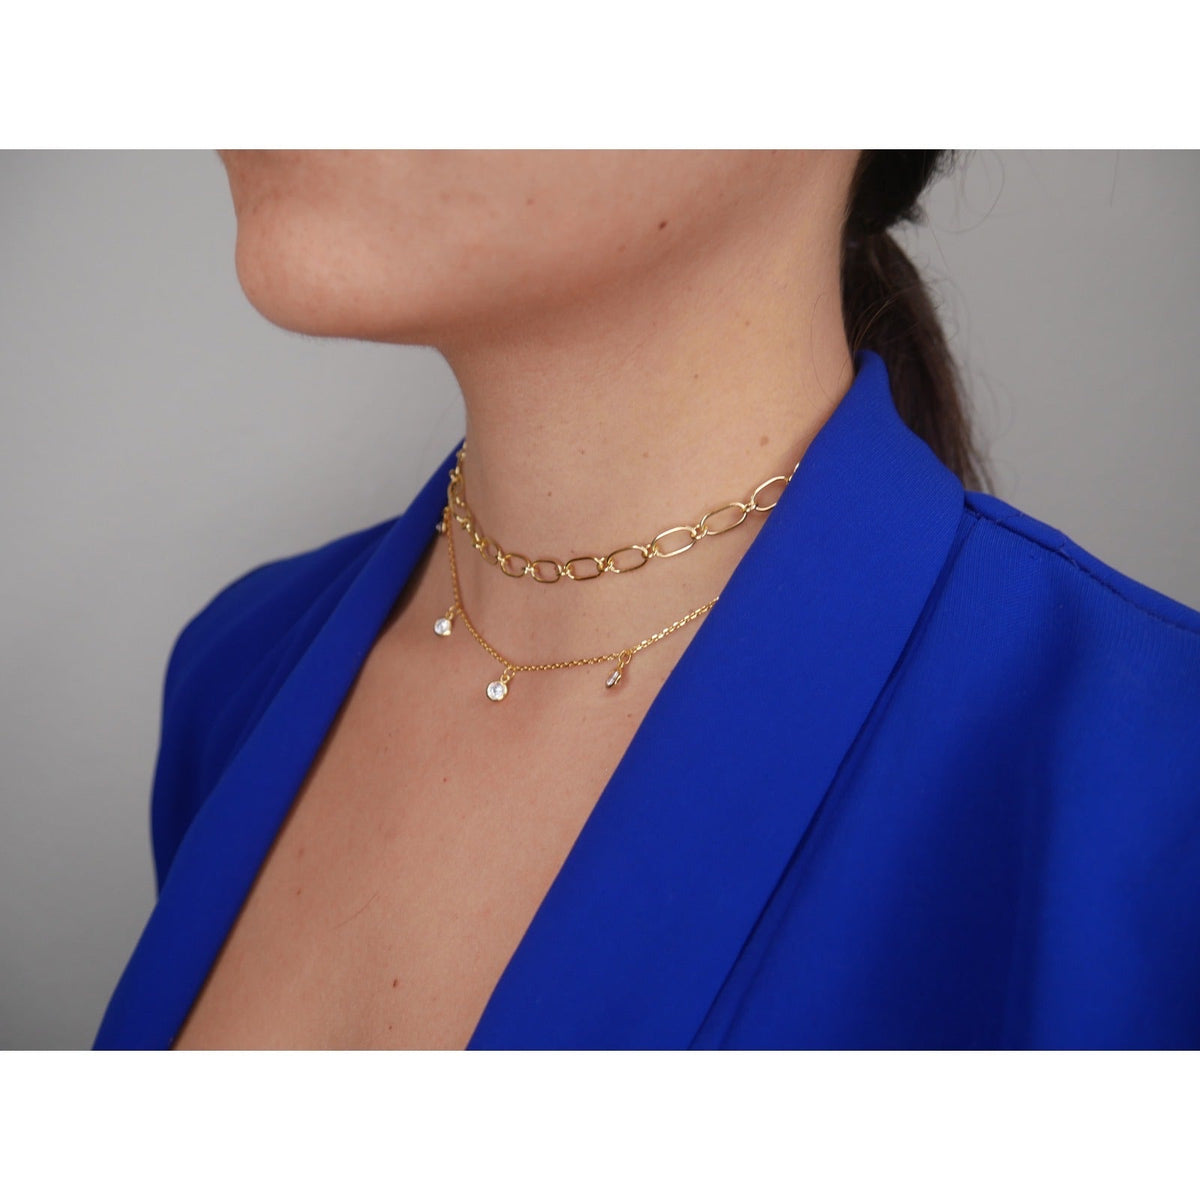 Paperclip Style Choker Necklace, 18k Gold Plated .925 Sterling Silver Short Necklace